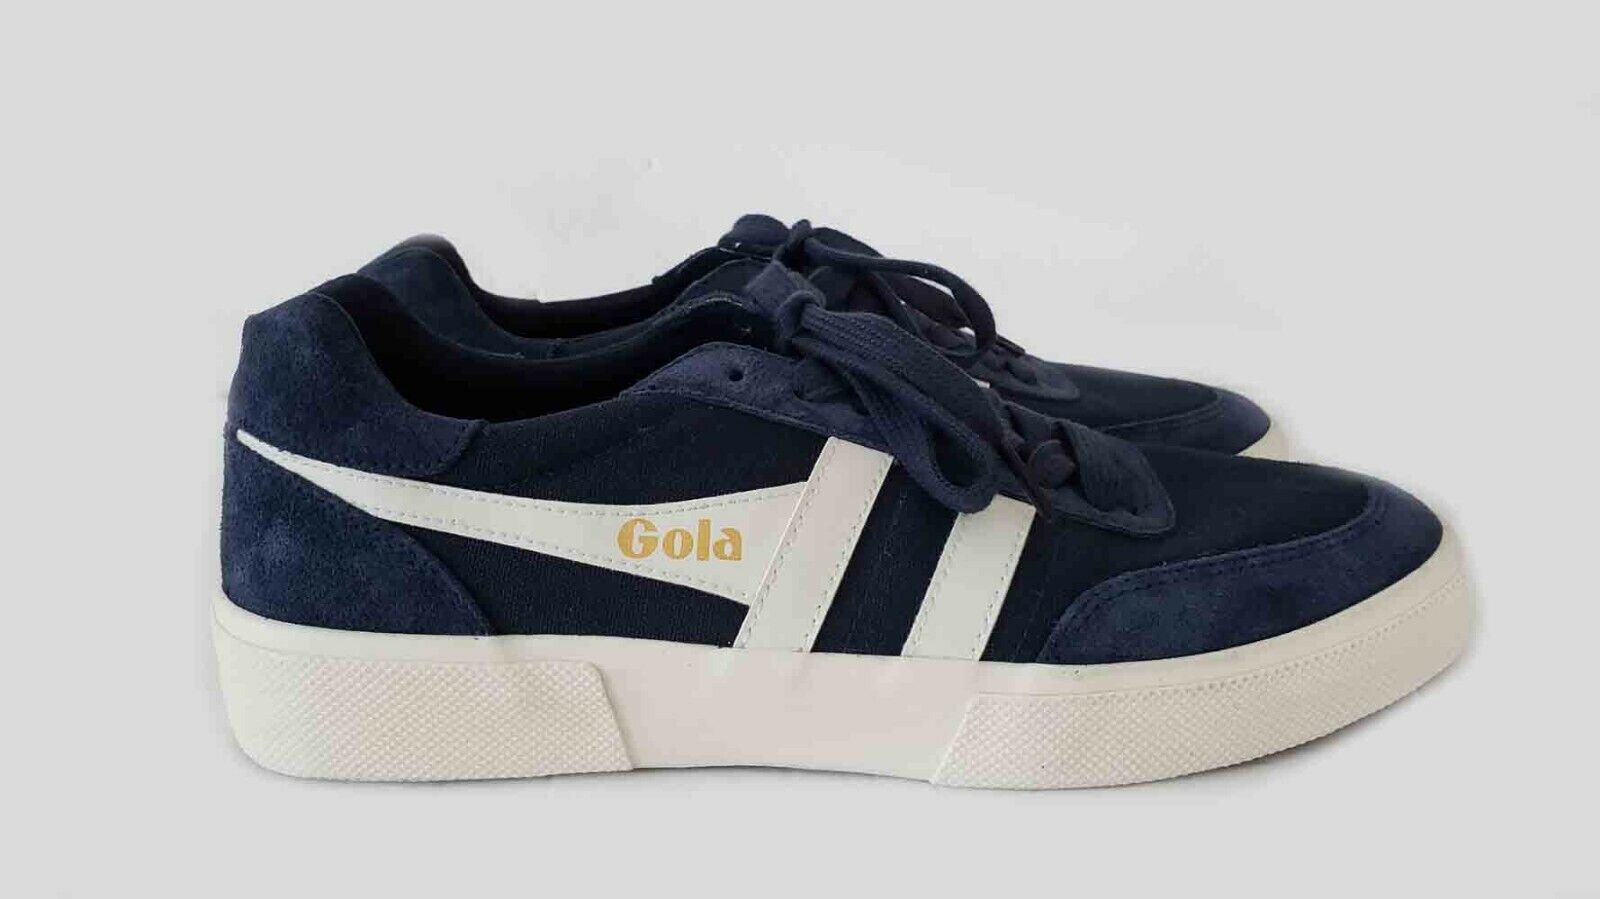 Gola Sneakers Shoes Navy Blue White Leather Suede CMB256 Men's Size USA 9M